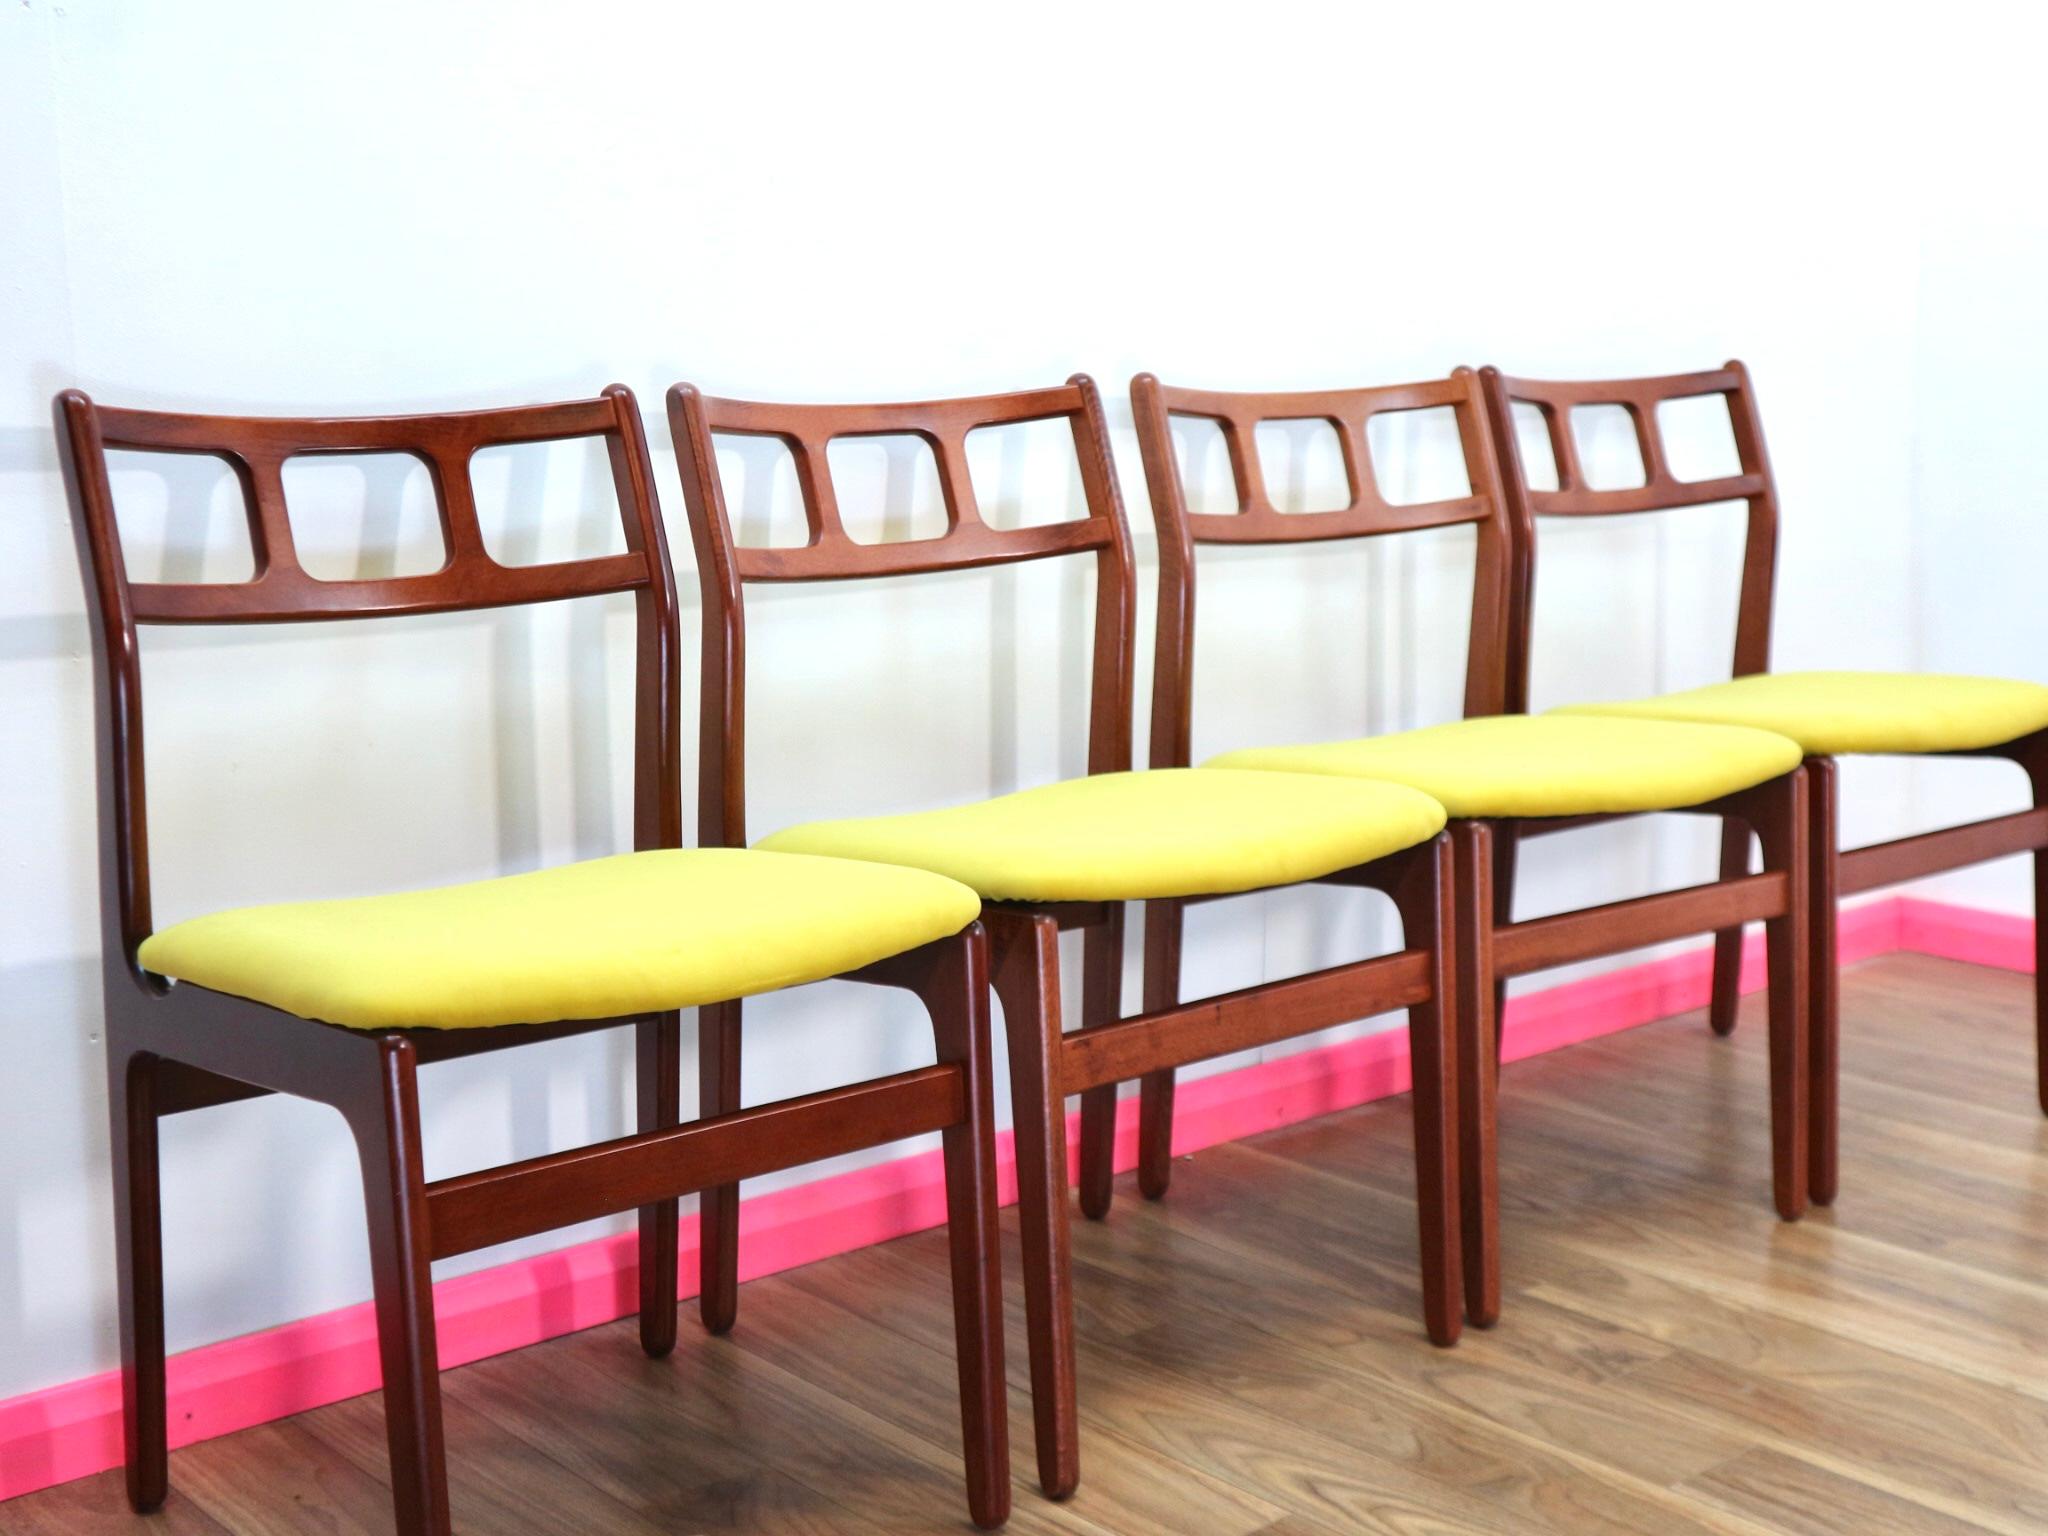 20th Century Mid-Century Modern Danish Design Dining Chairs by D, Scan Set of 4